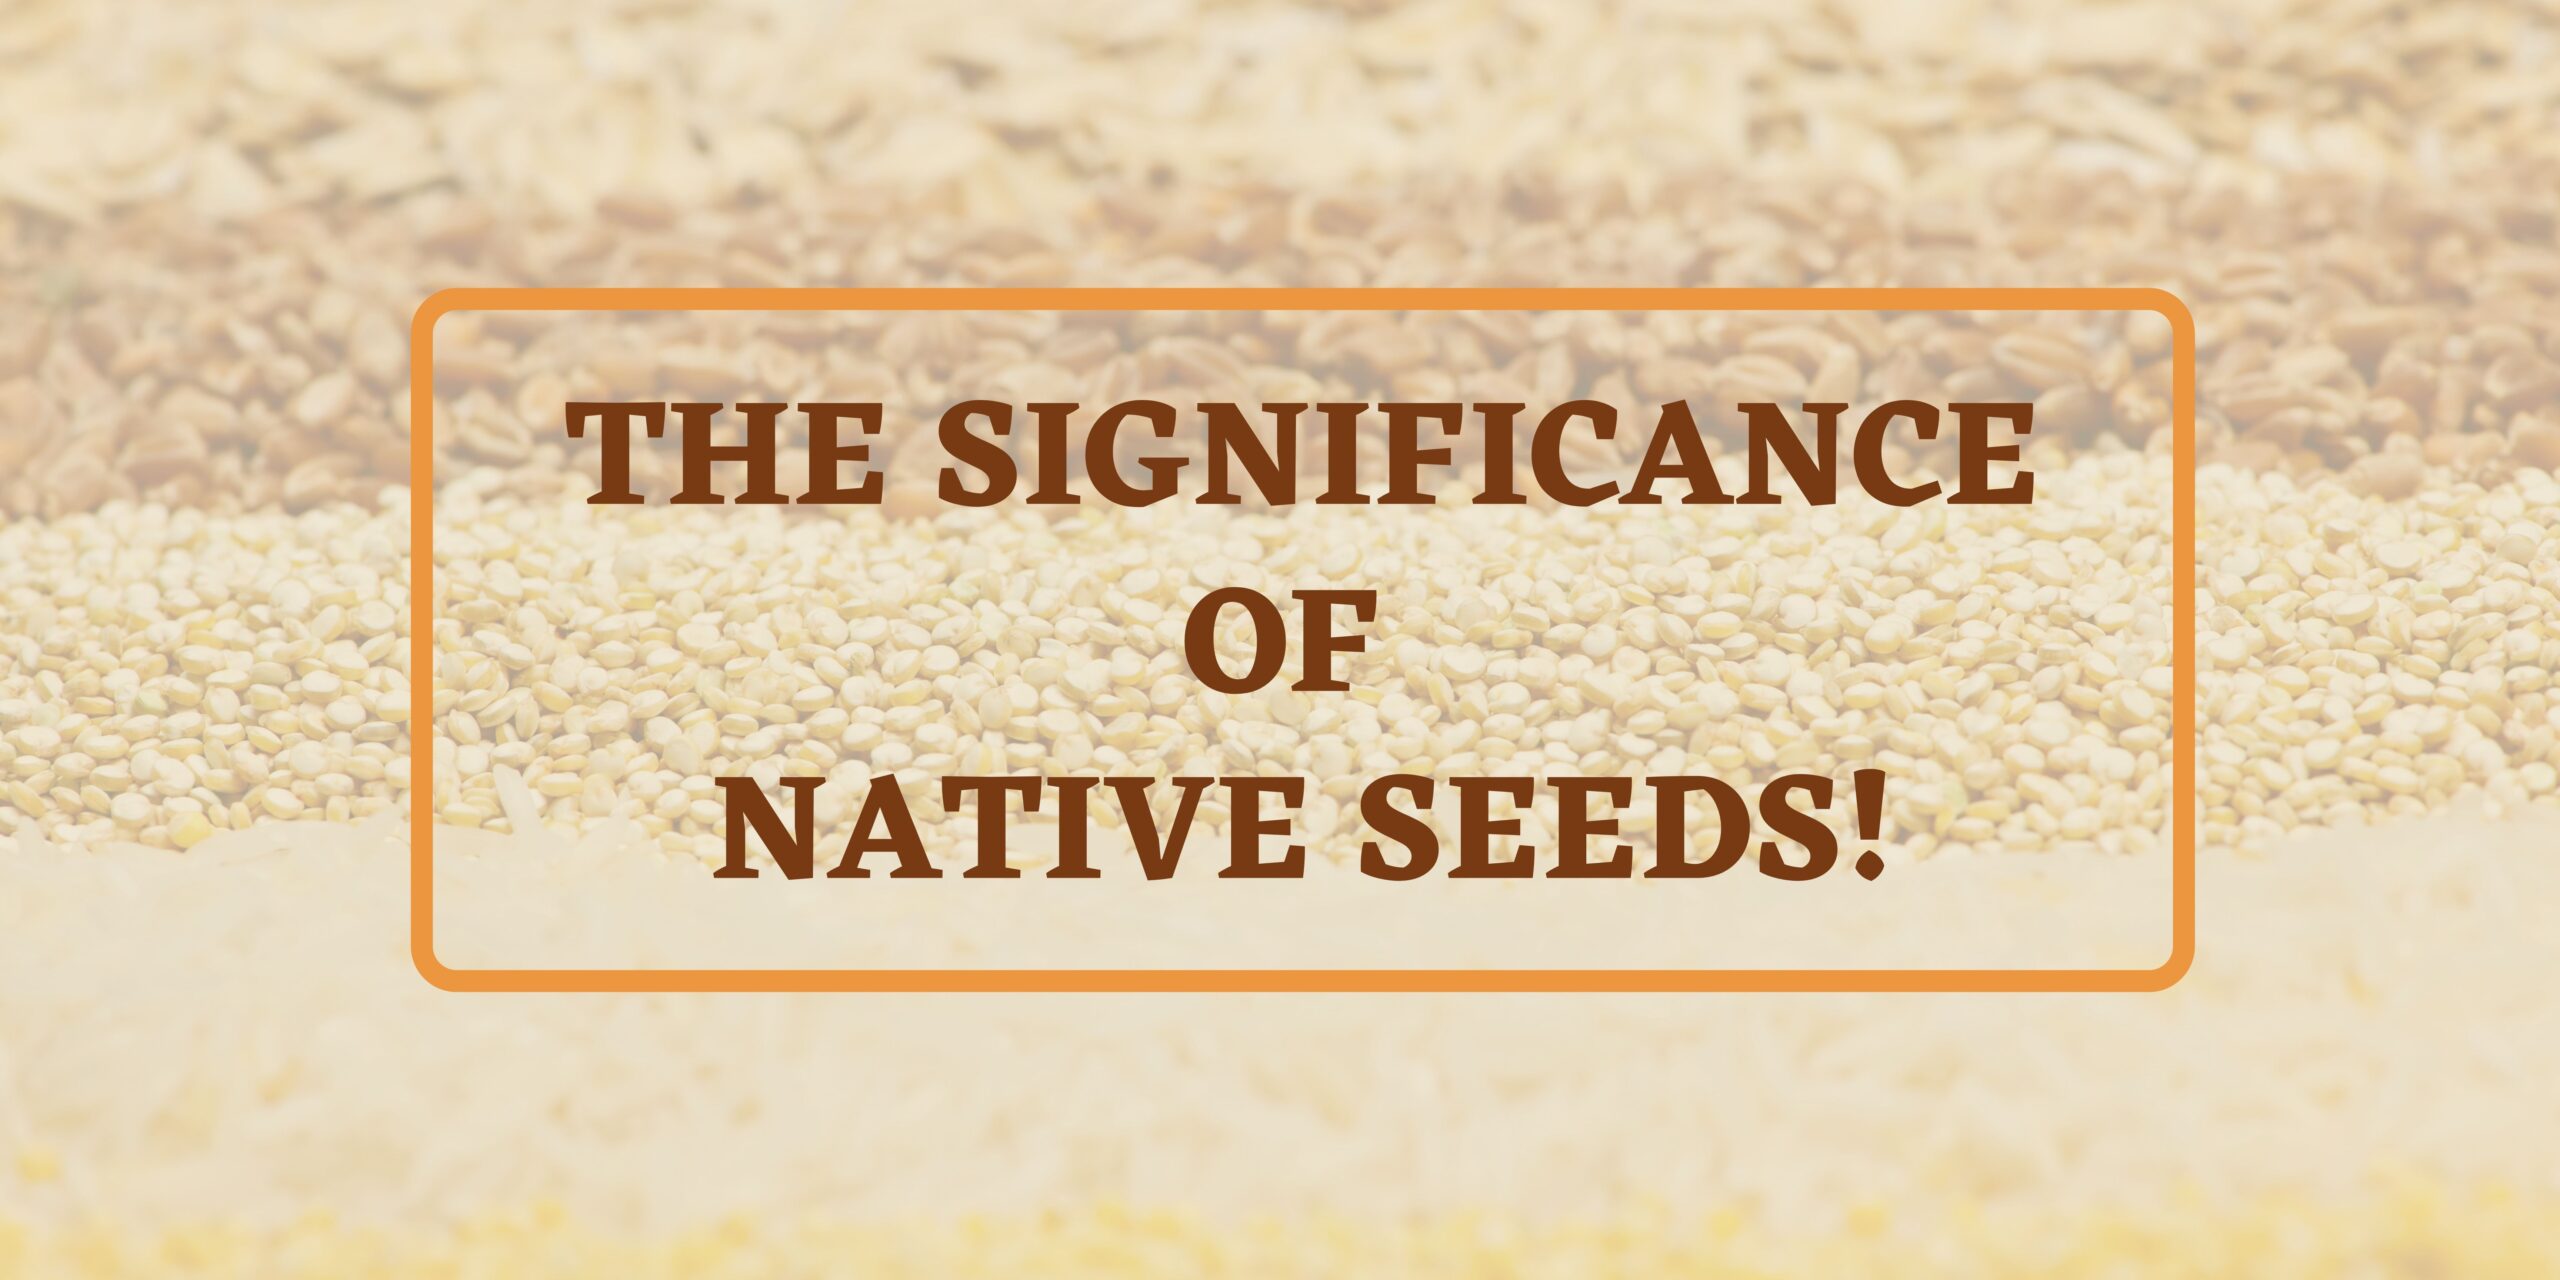 Why are Native or Indigenous Seeds Significant?